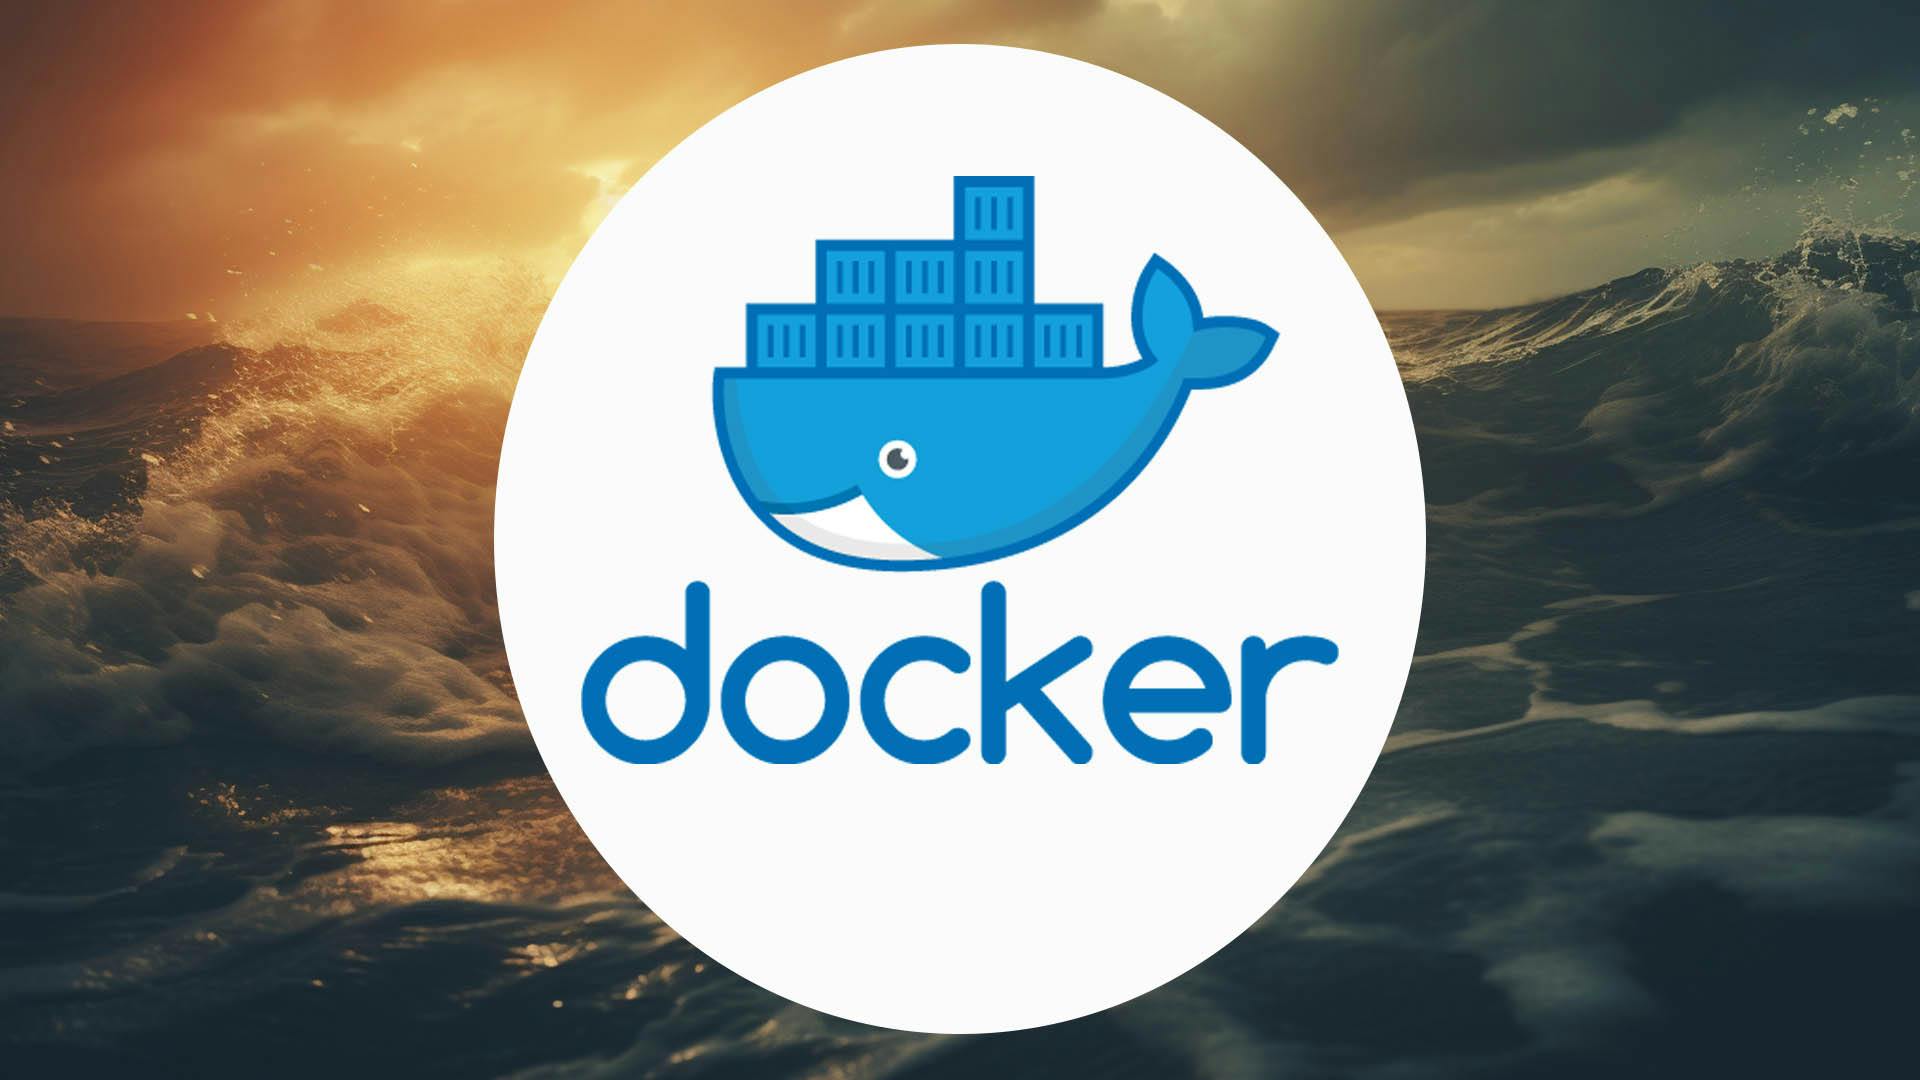 What is Docker, And Why Use It?